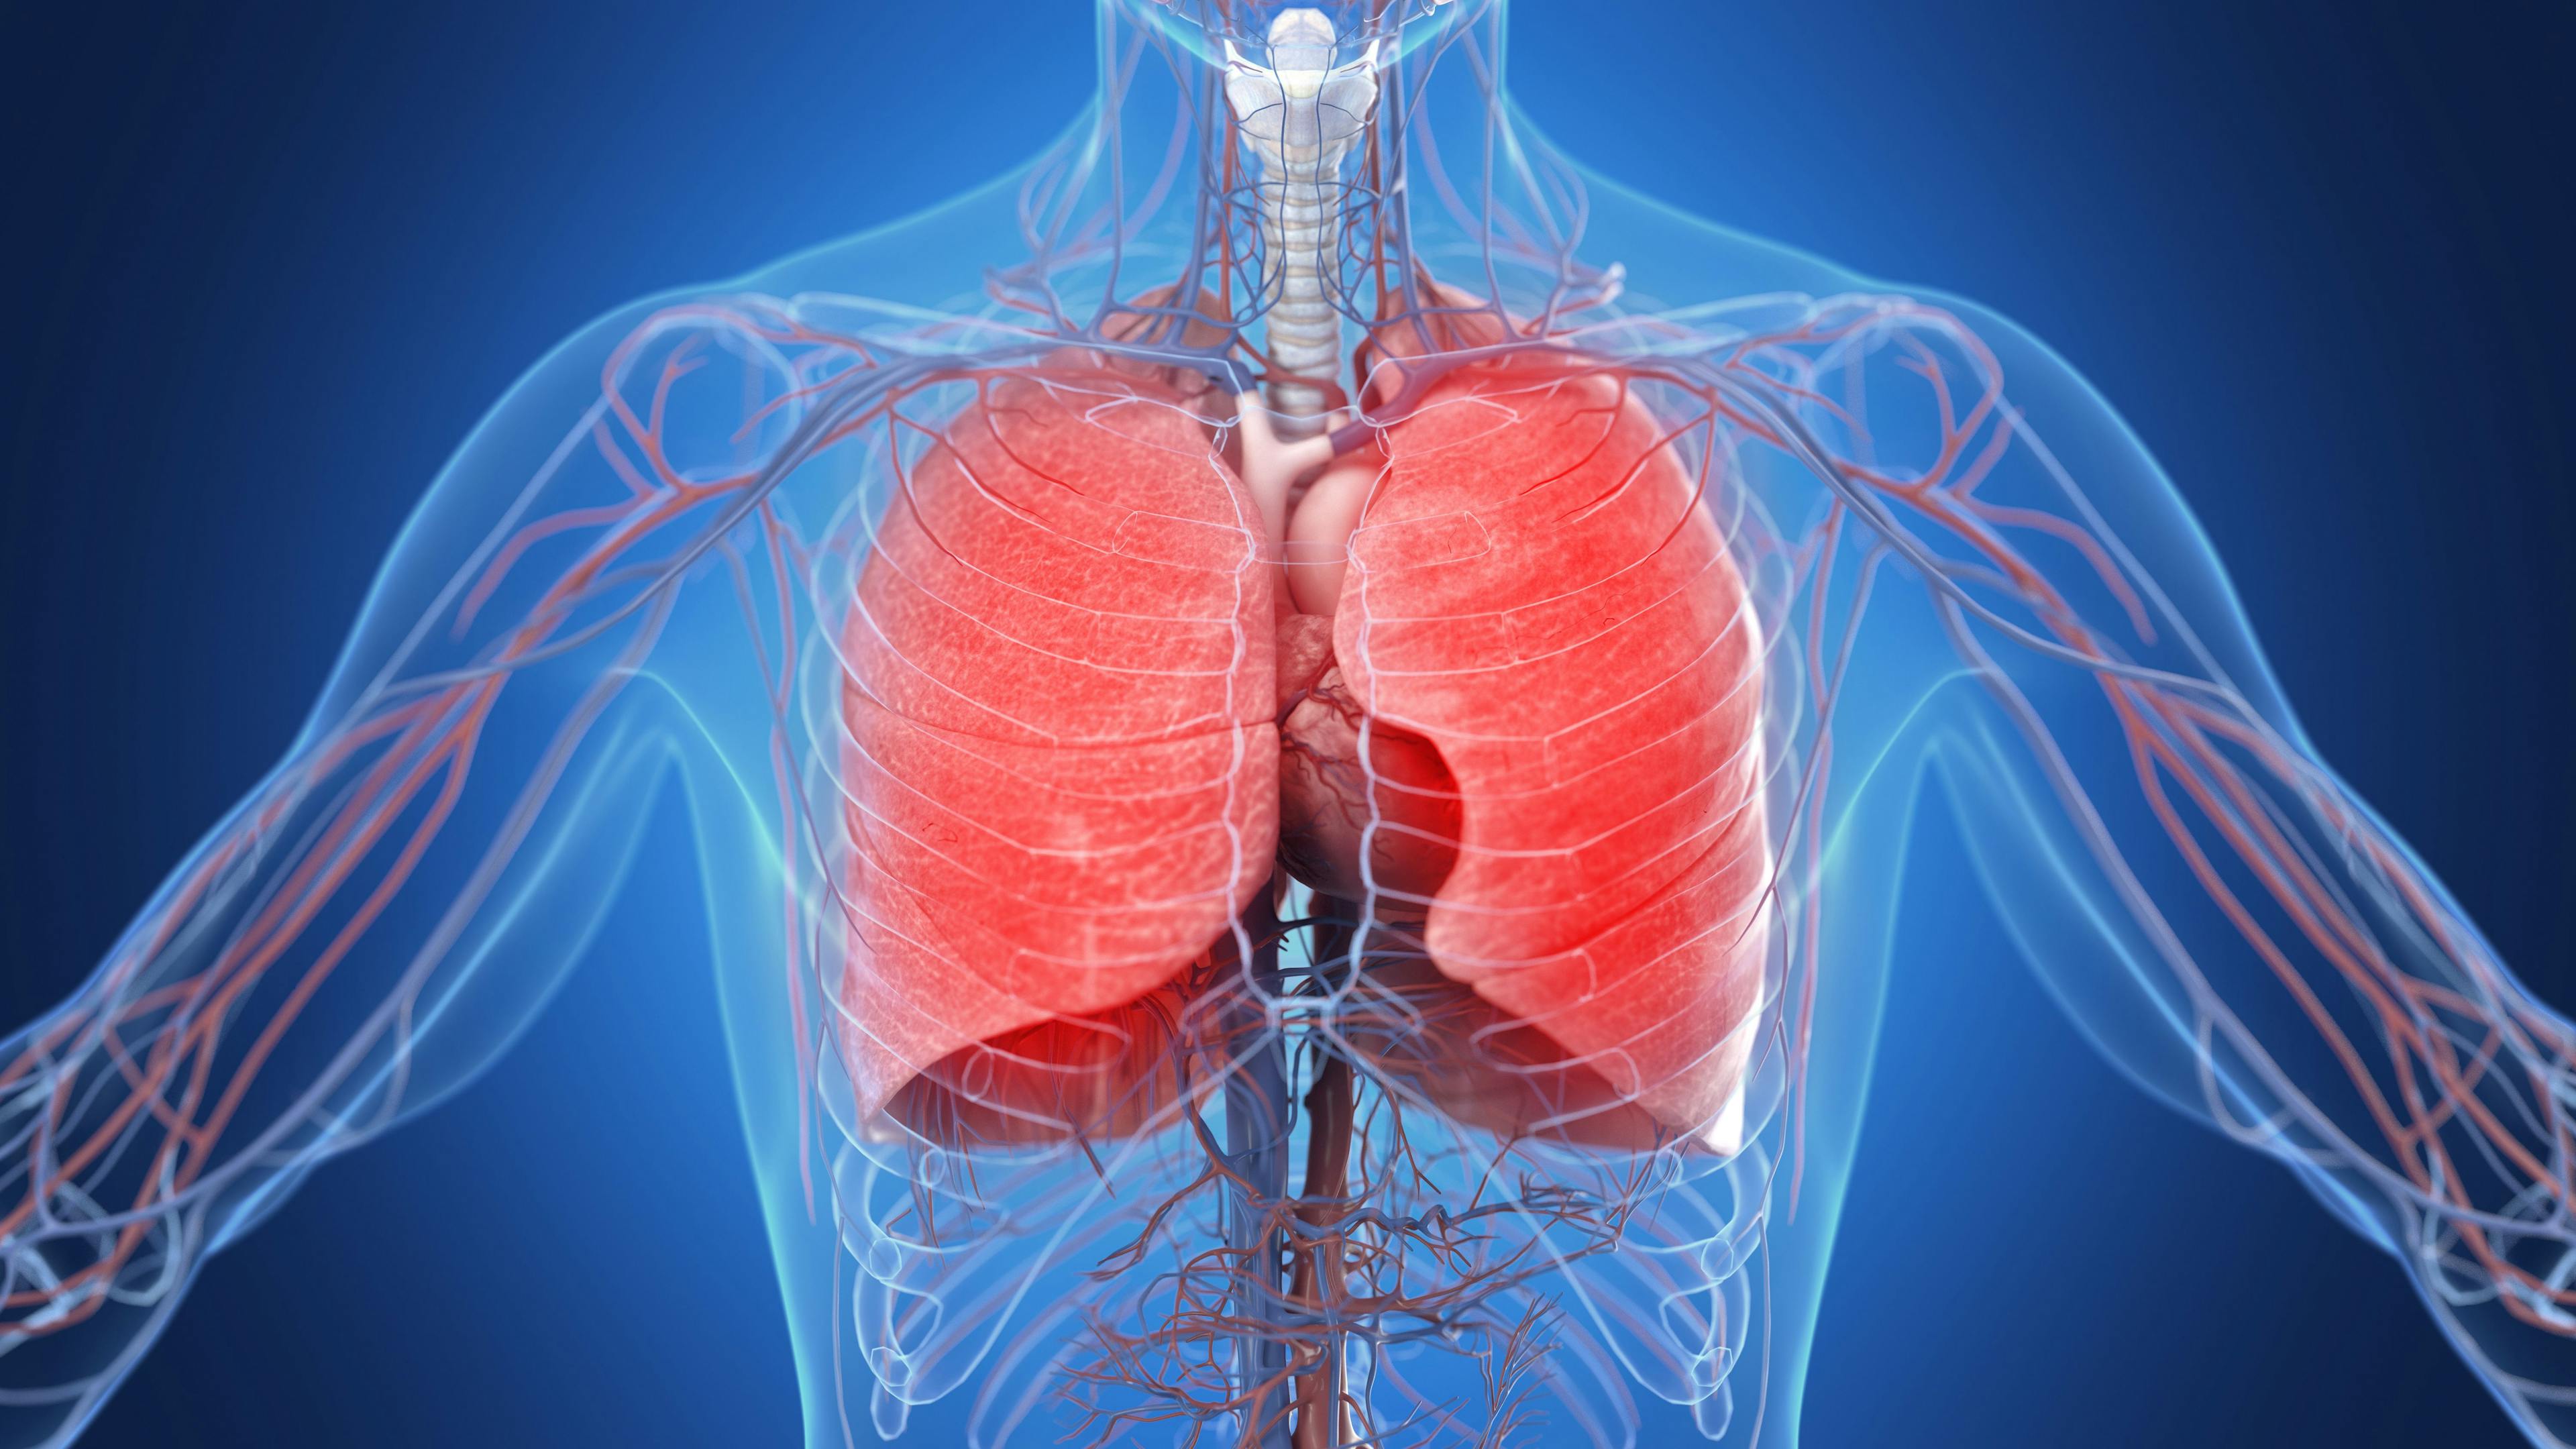 Inflamed lungs | Image credit: SciePro - stock.adobe.com